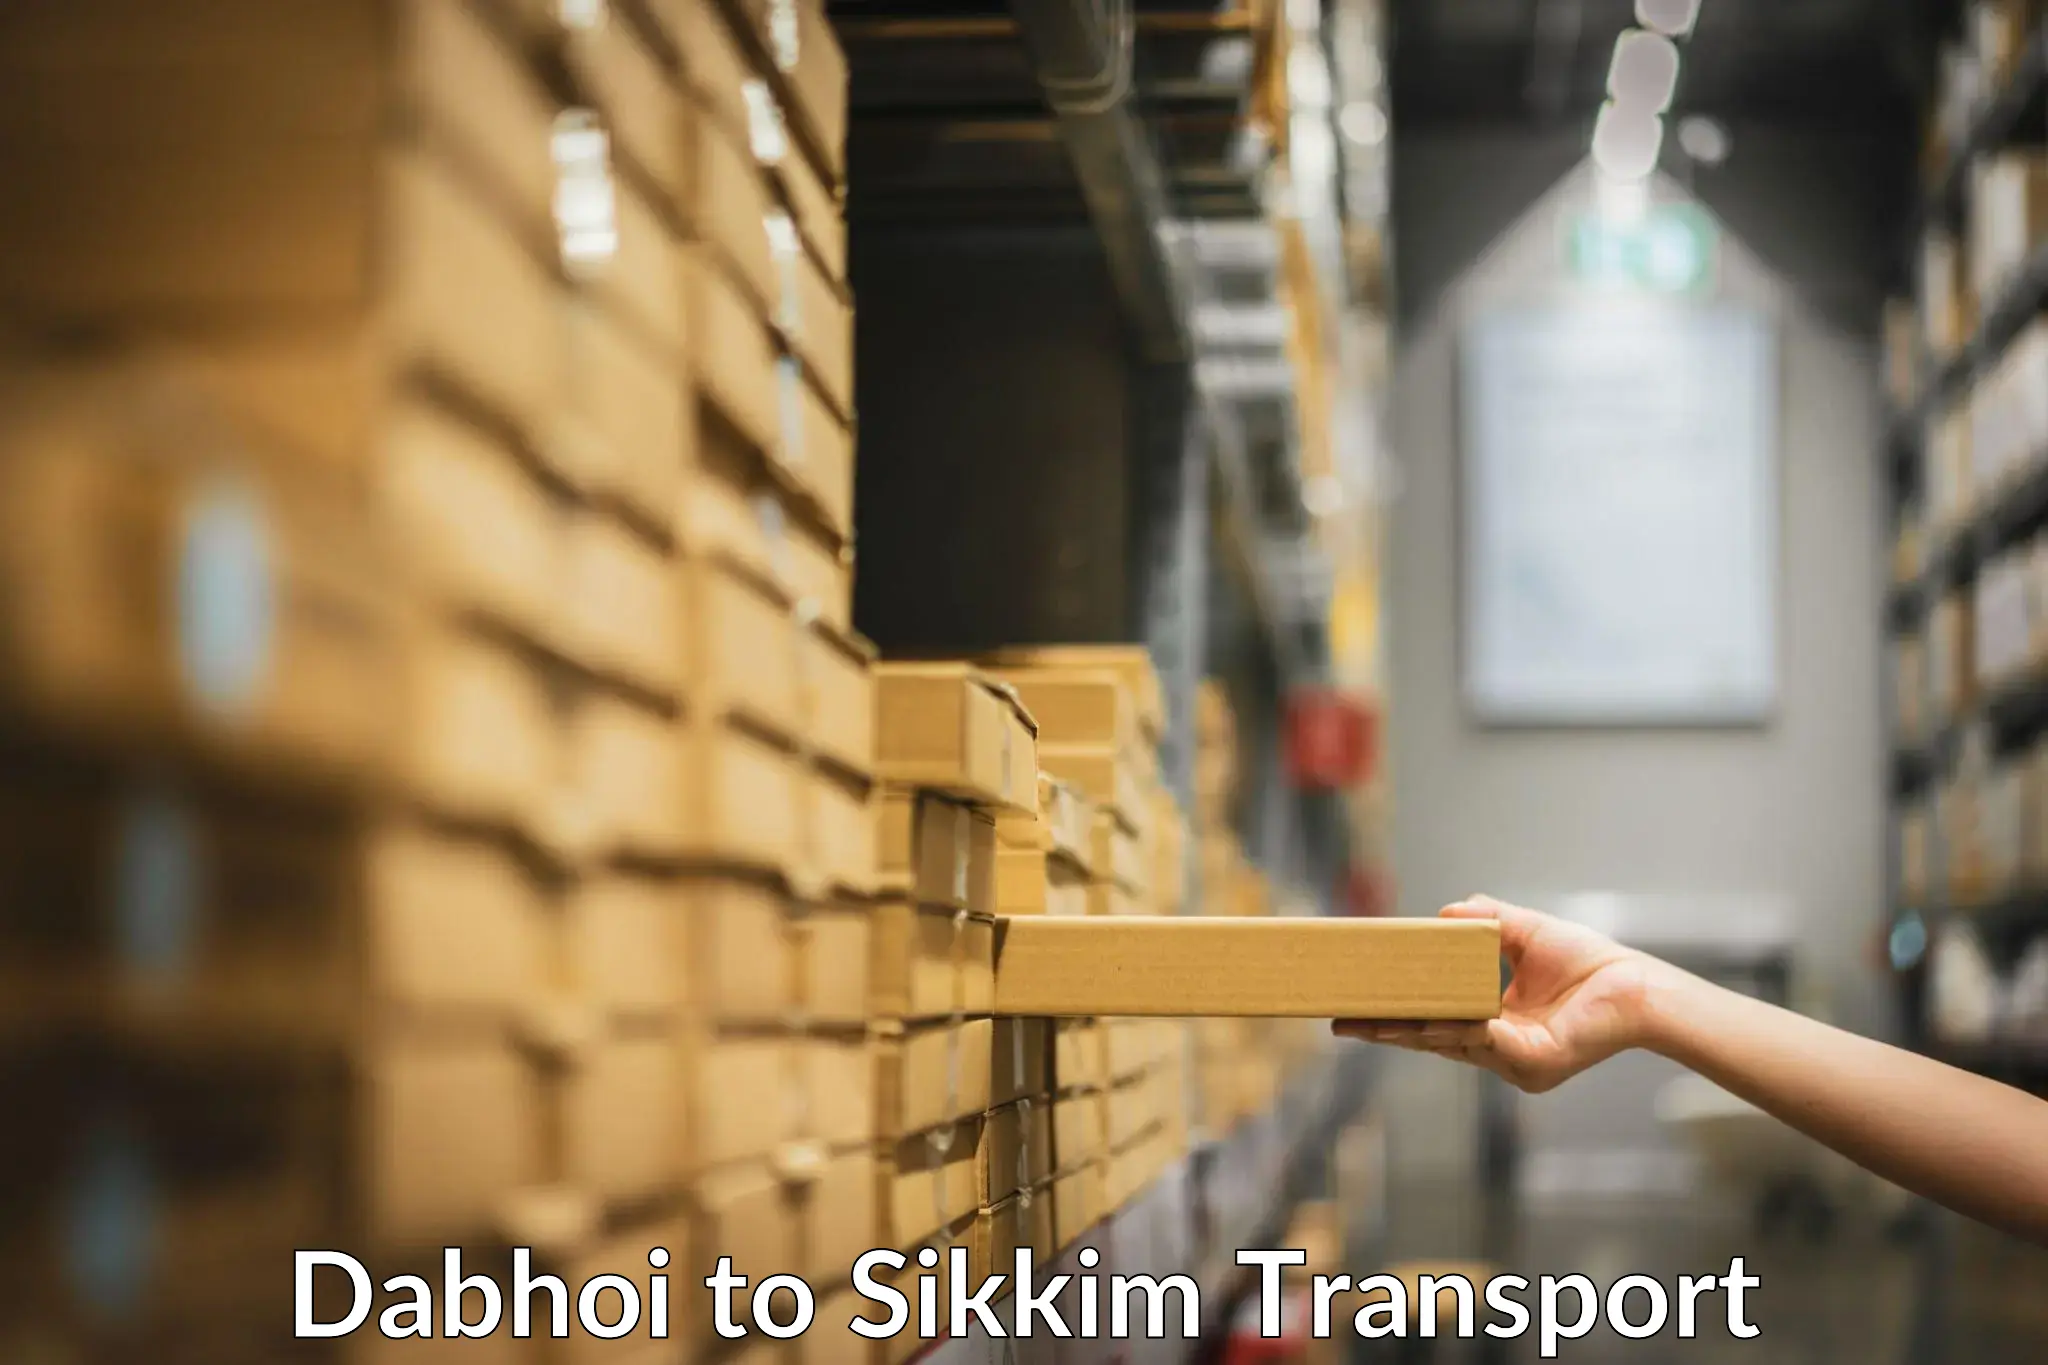 Container transport service Dabhoi to Geyzing